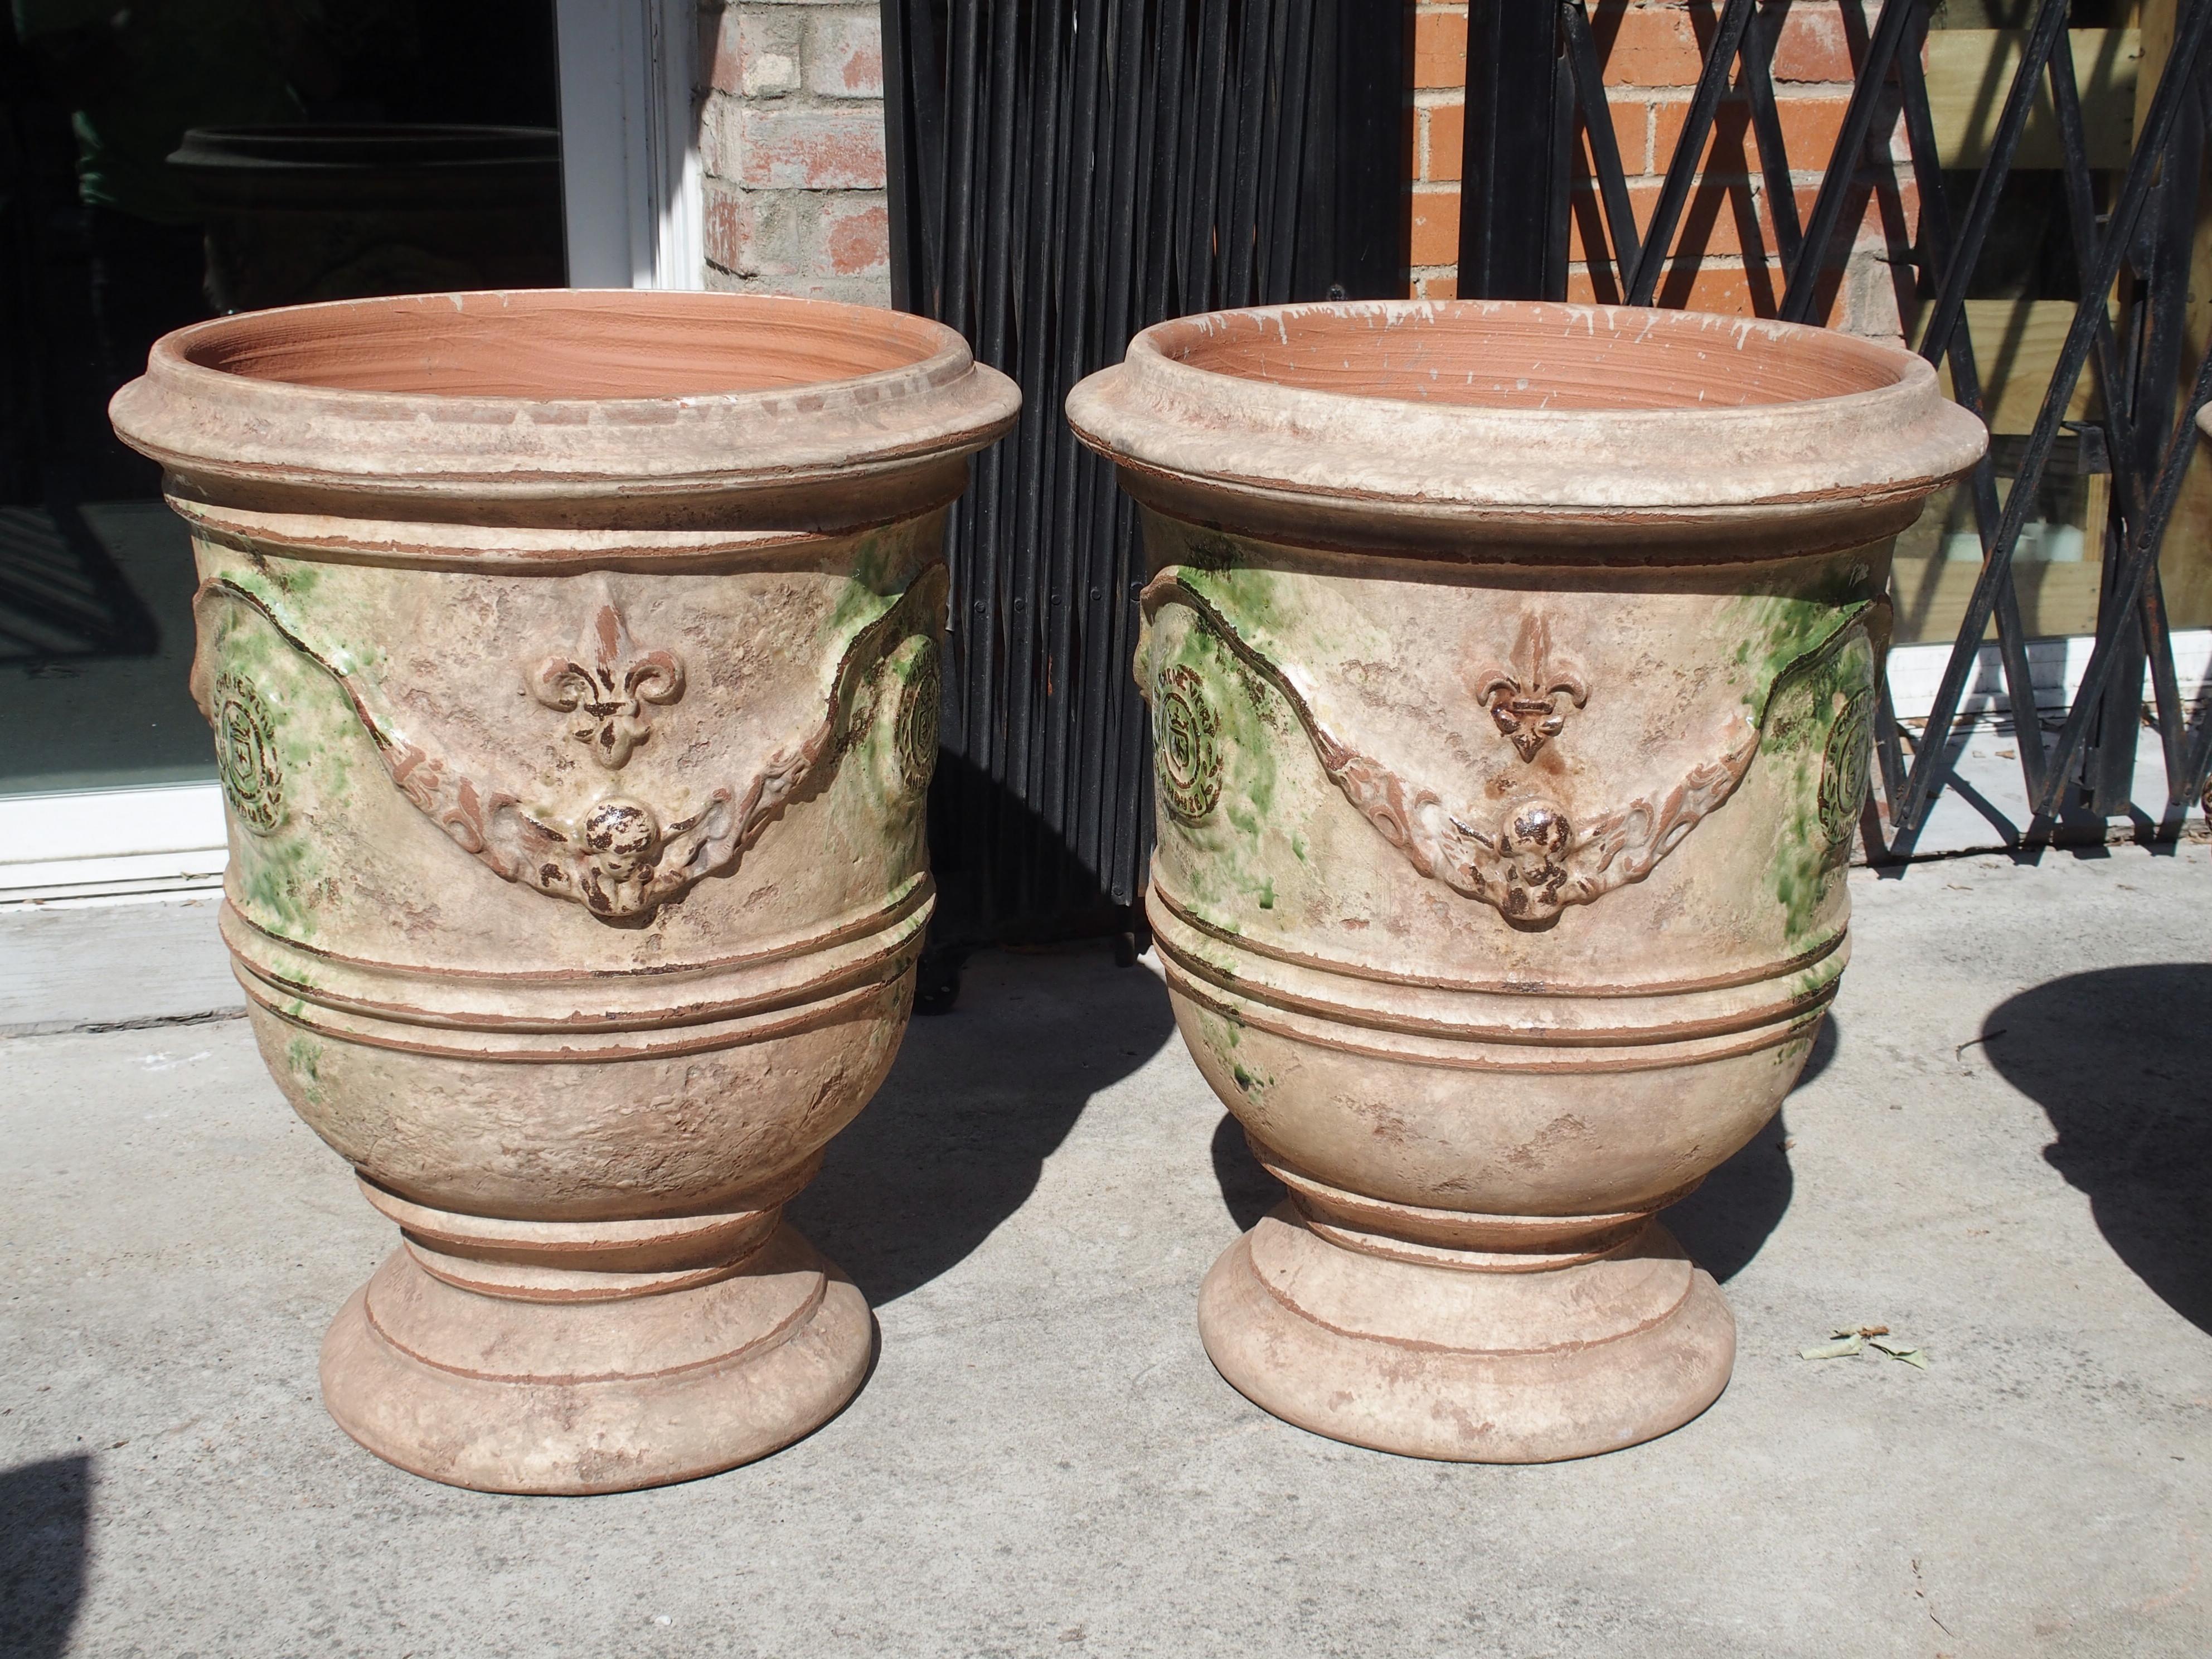 Pair of Mid Sized Distressed Terra Cotta Planters from Anduze, France 1